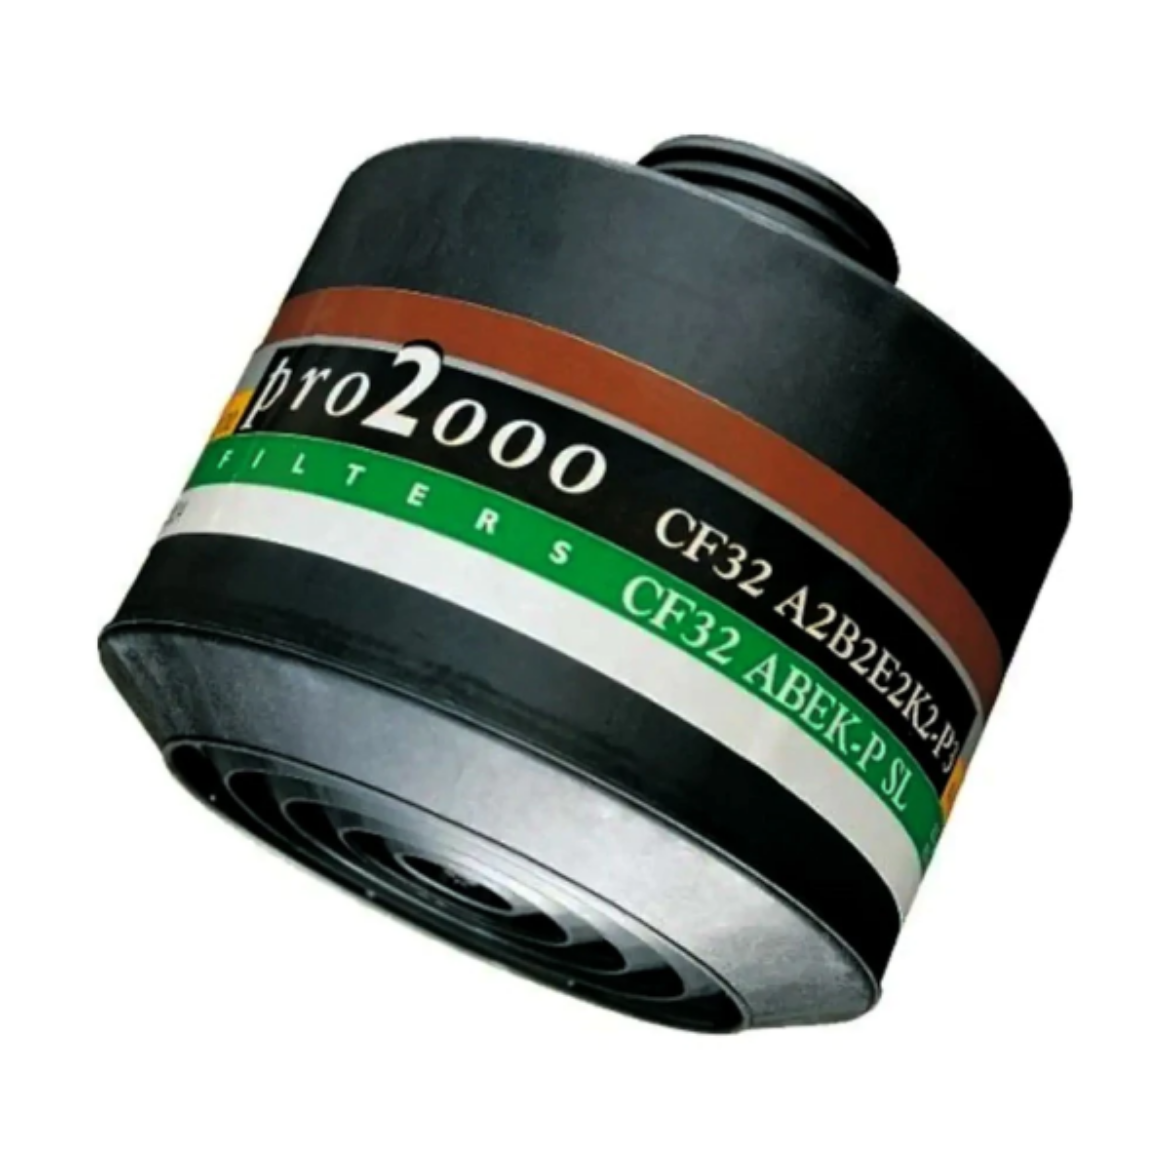 Picture of 042799 PRO2000 CF 32 A2B2E2K2-P3 FILTER